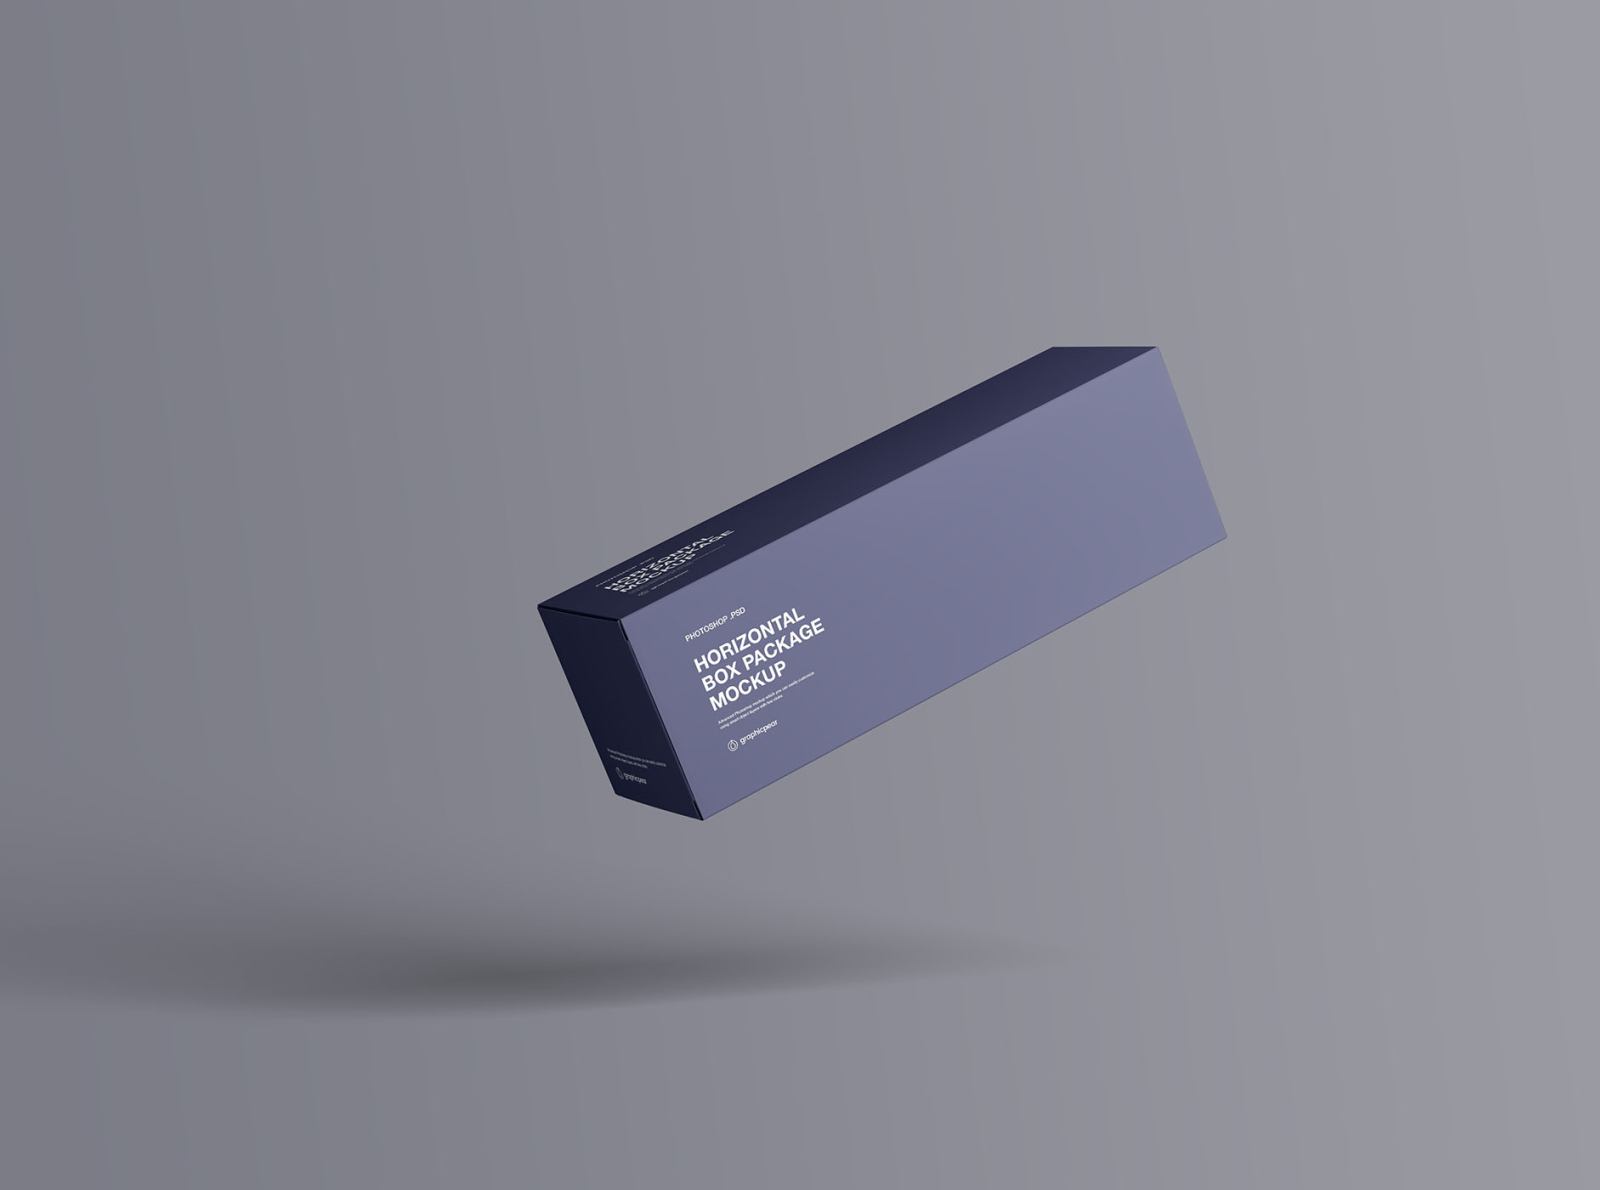 Download Horizontal Package Box Mockup by Graphic Pear on Dribbble